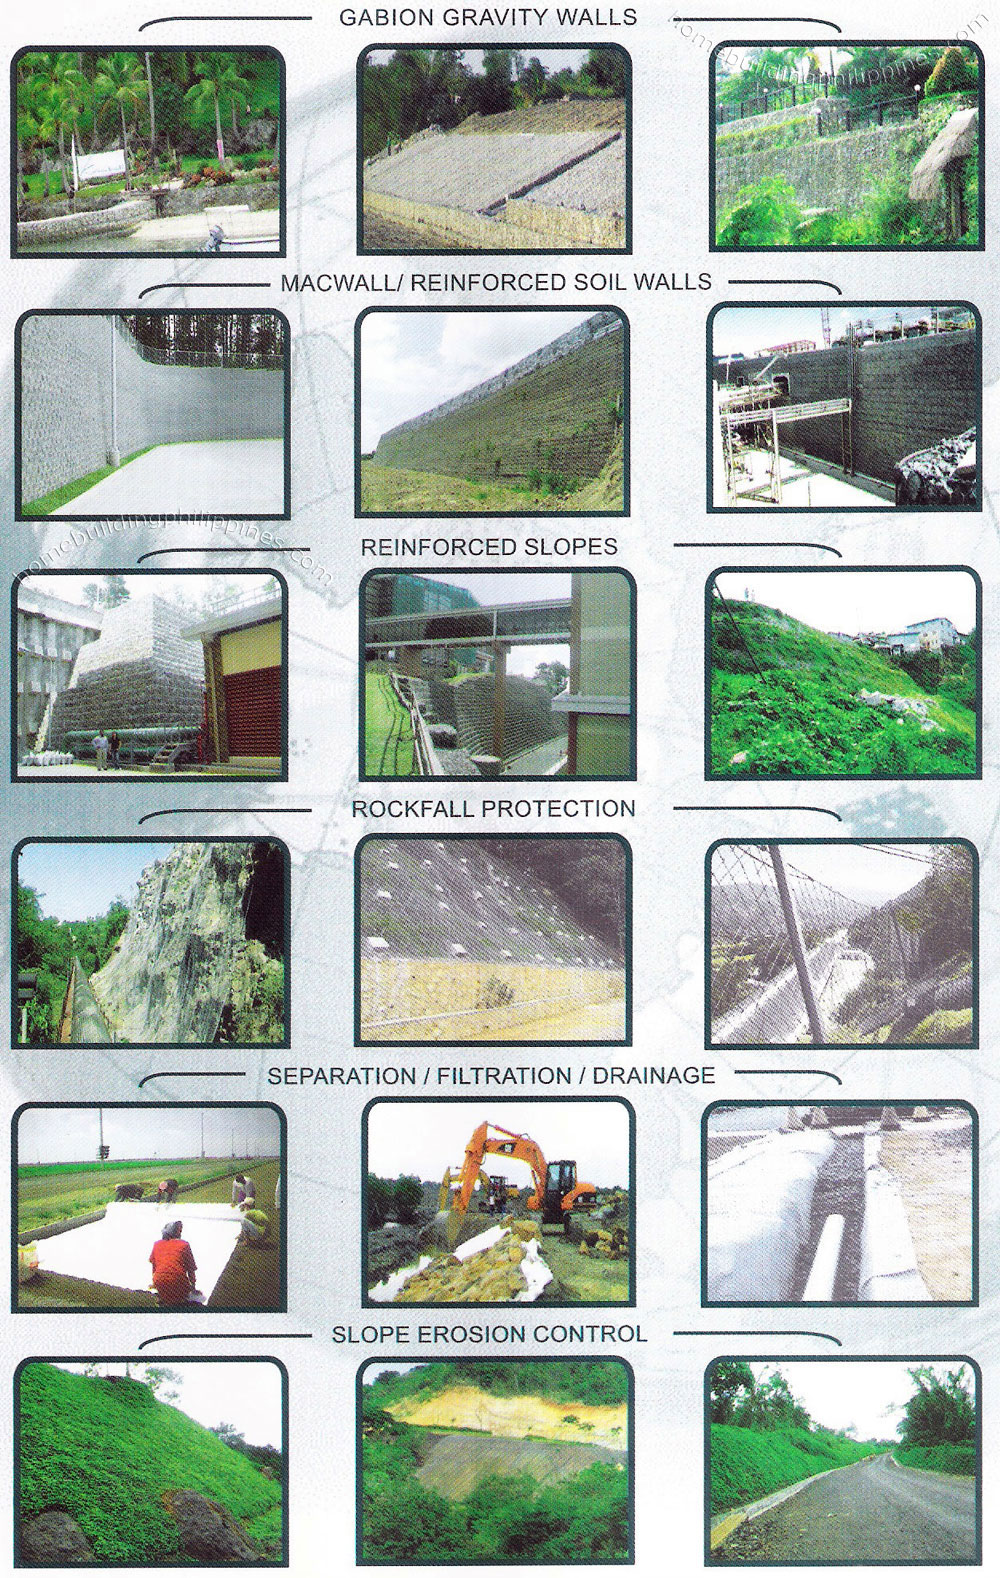 Gabion Gravity Wall Reinforced Soil Wall Slopes Rockfall Protection Separation Filtration Drainage Slope Erosion Control